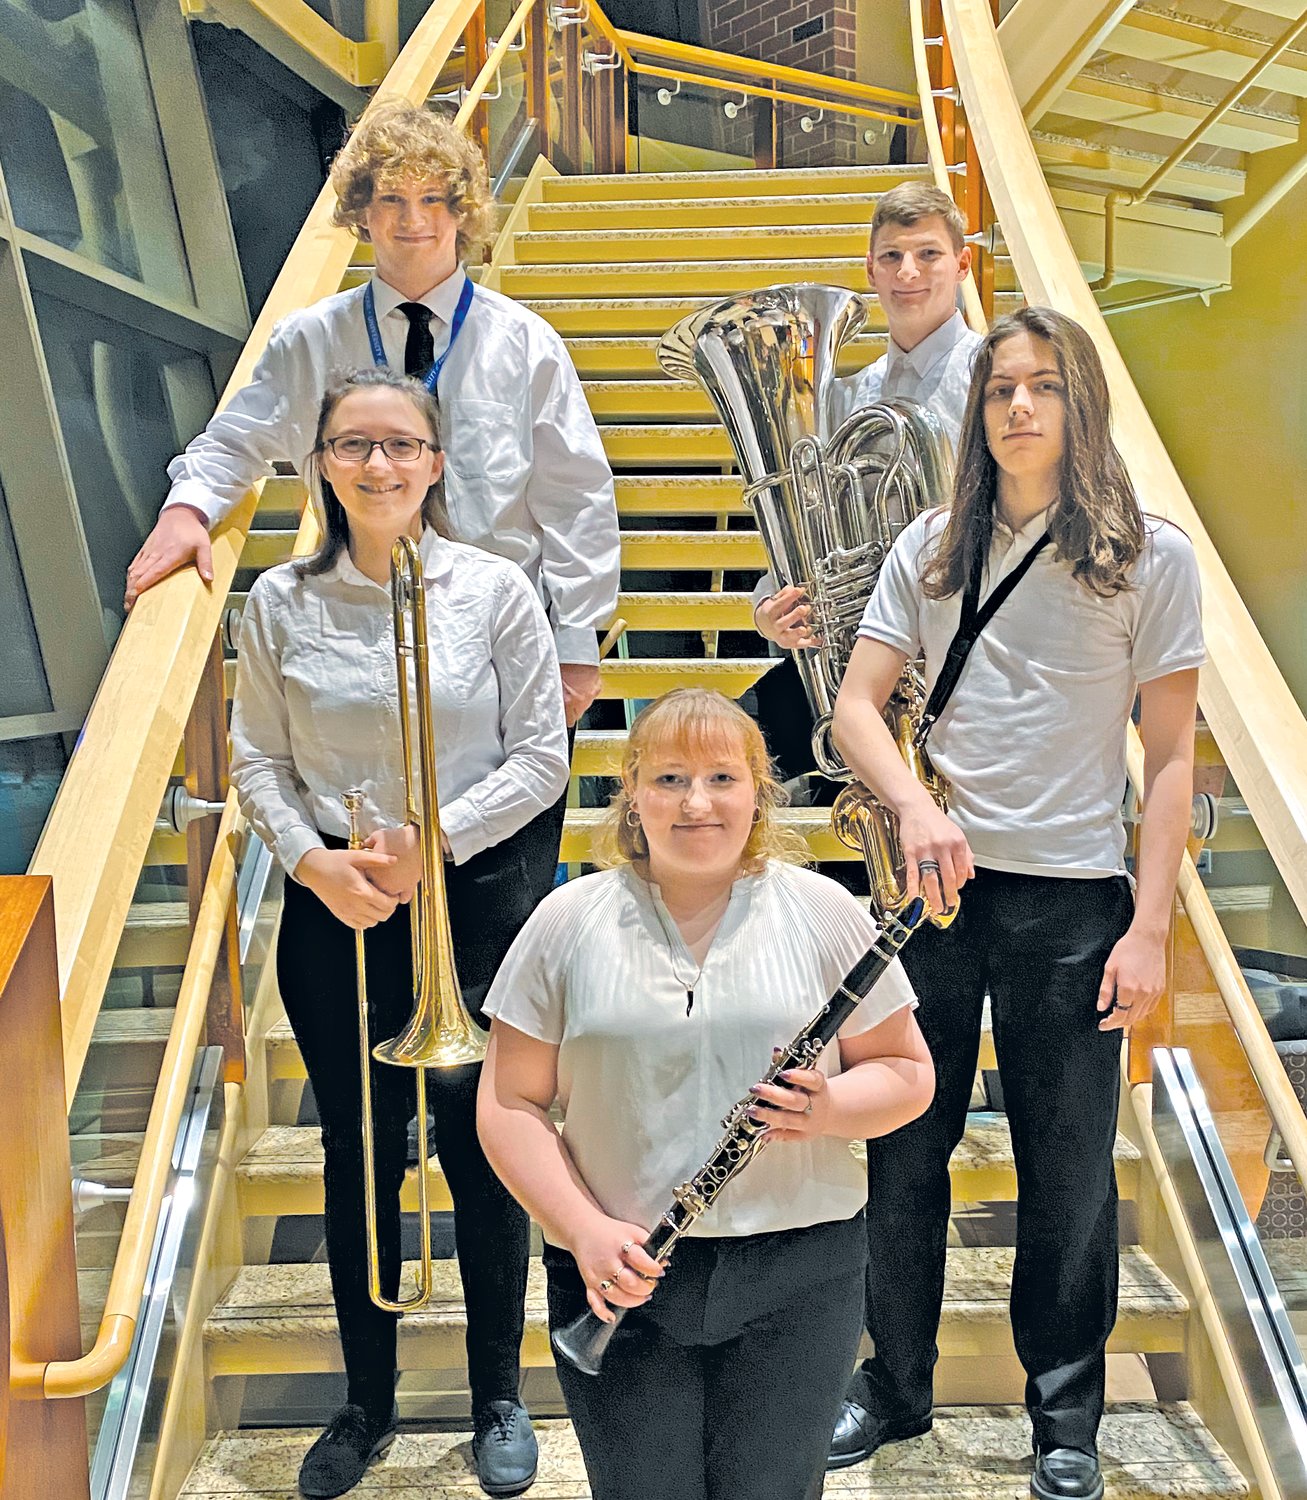 Highland band students Joshua Lauer, Gwen Piette, Ally Pokorny, Andrew Lana, and Ethan Krotz participated in the University of Dubuque High School Honor Band on Jan. 20.